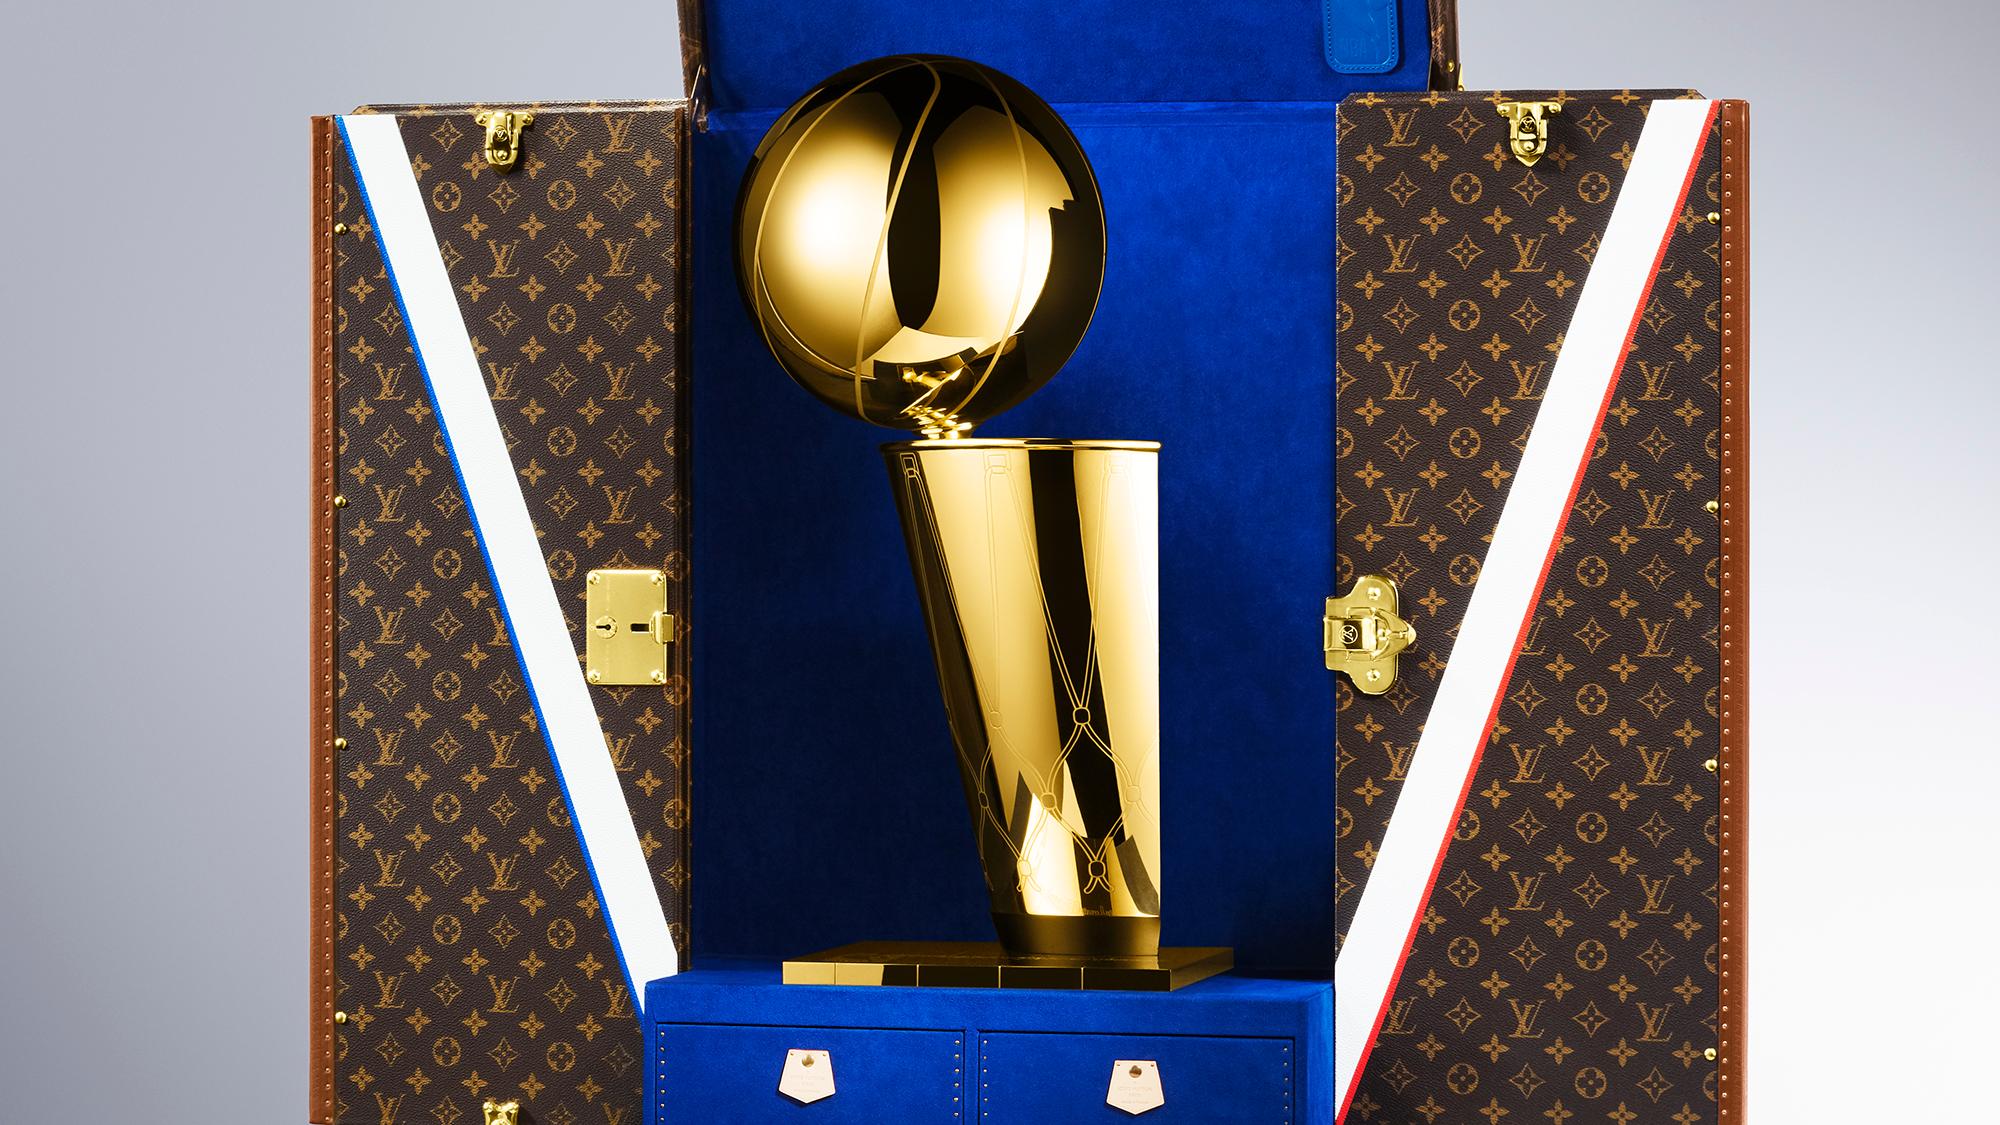 Reacting to the NBA Finals trophy being presented in a Louis Vuitton case